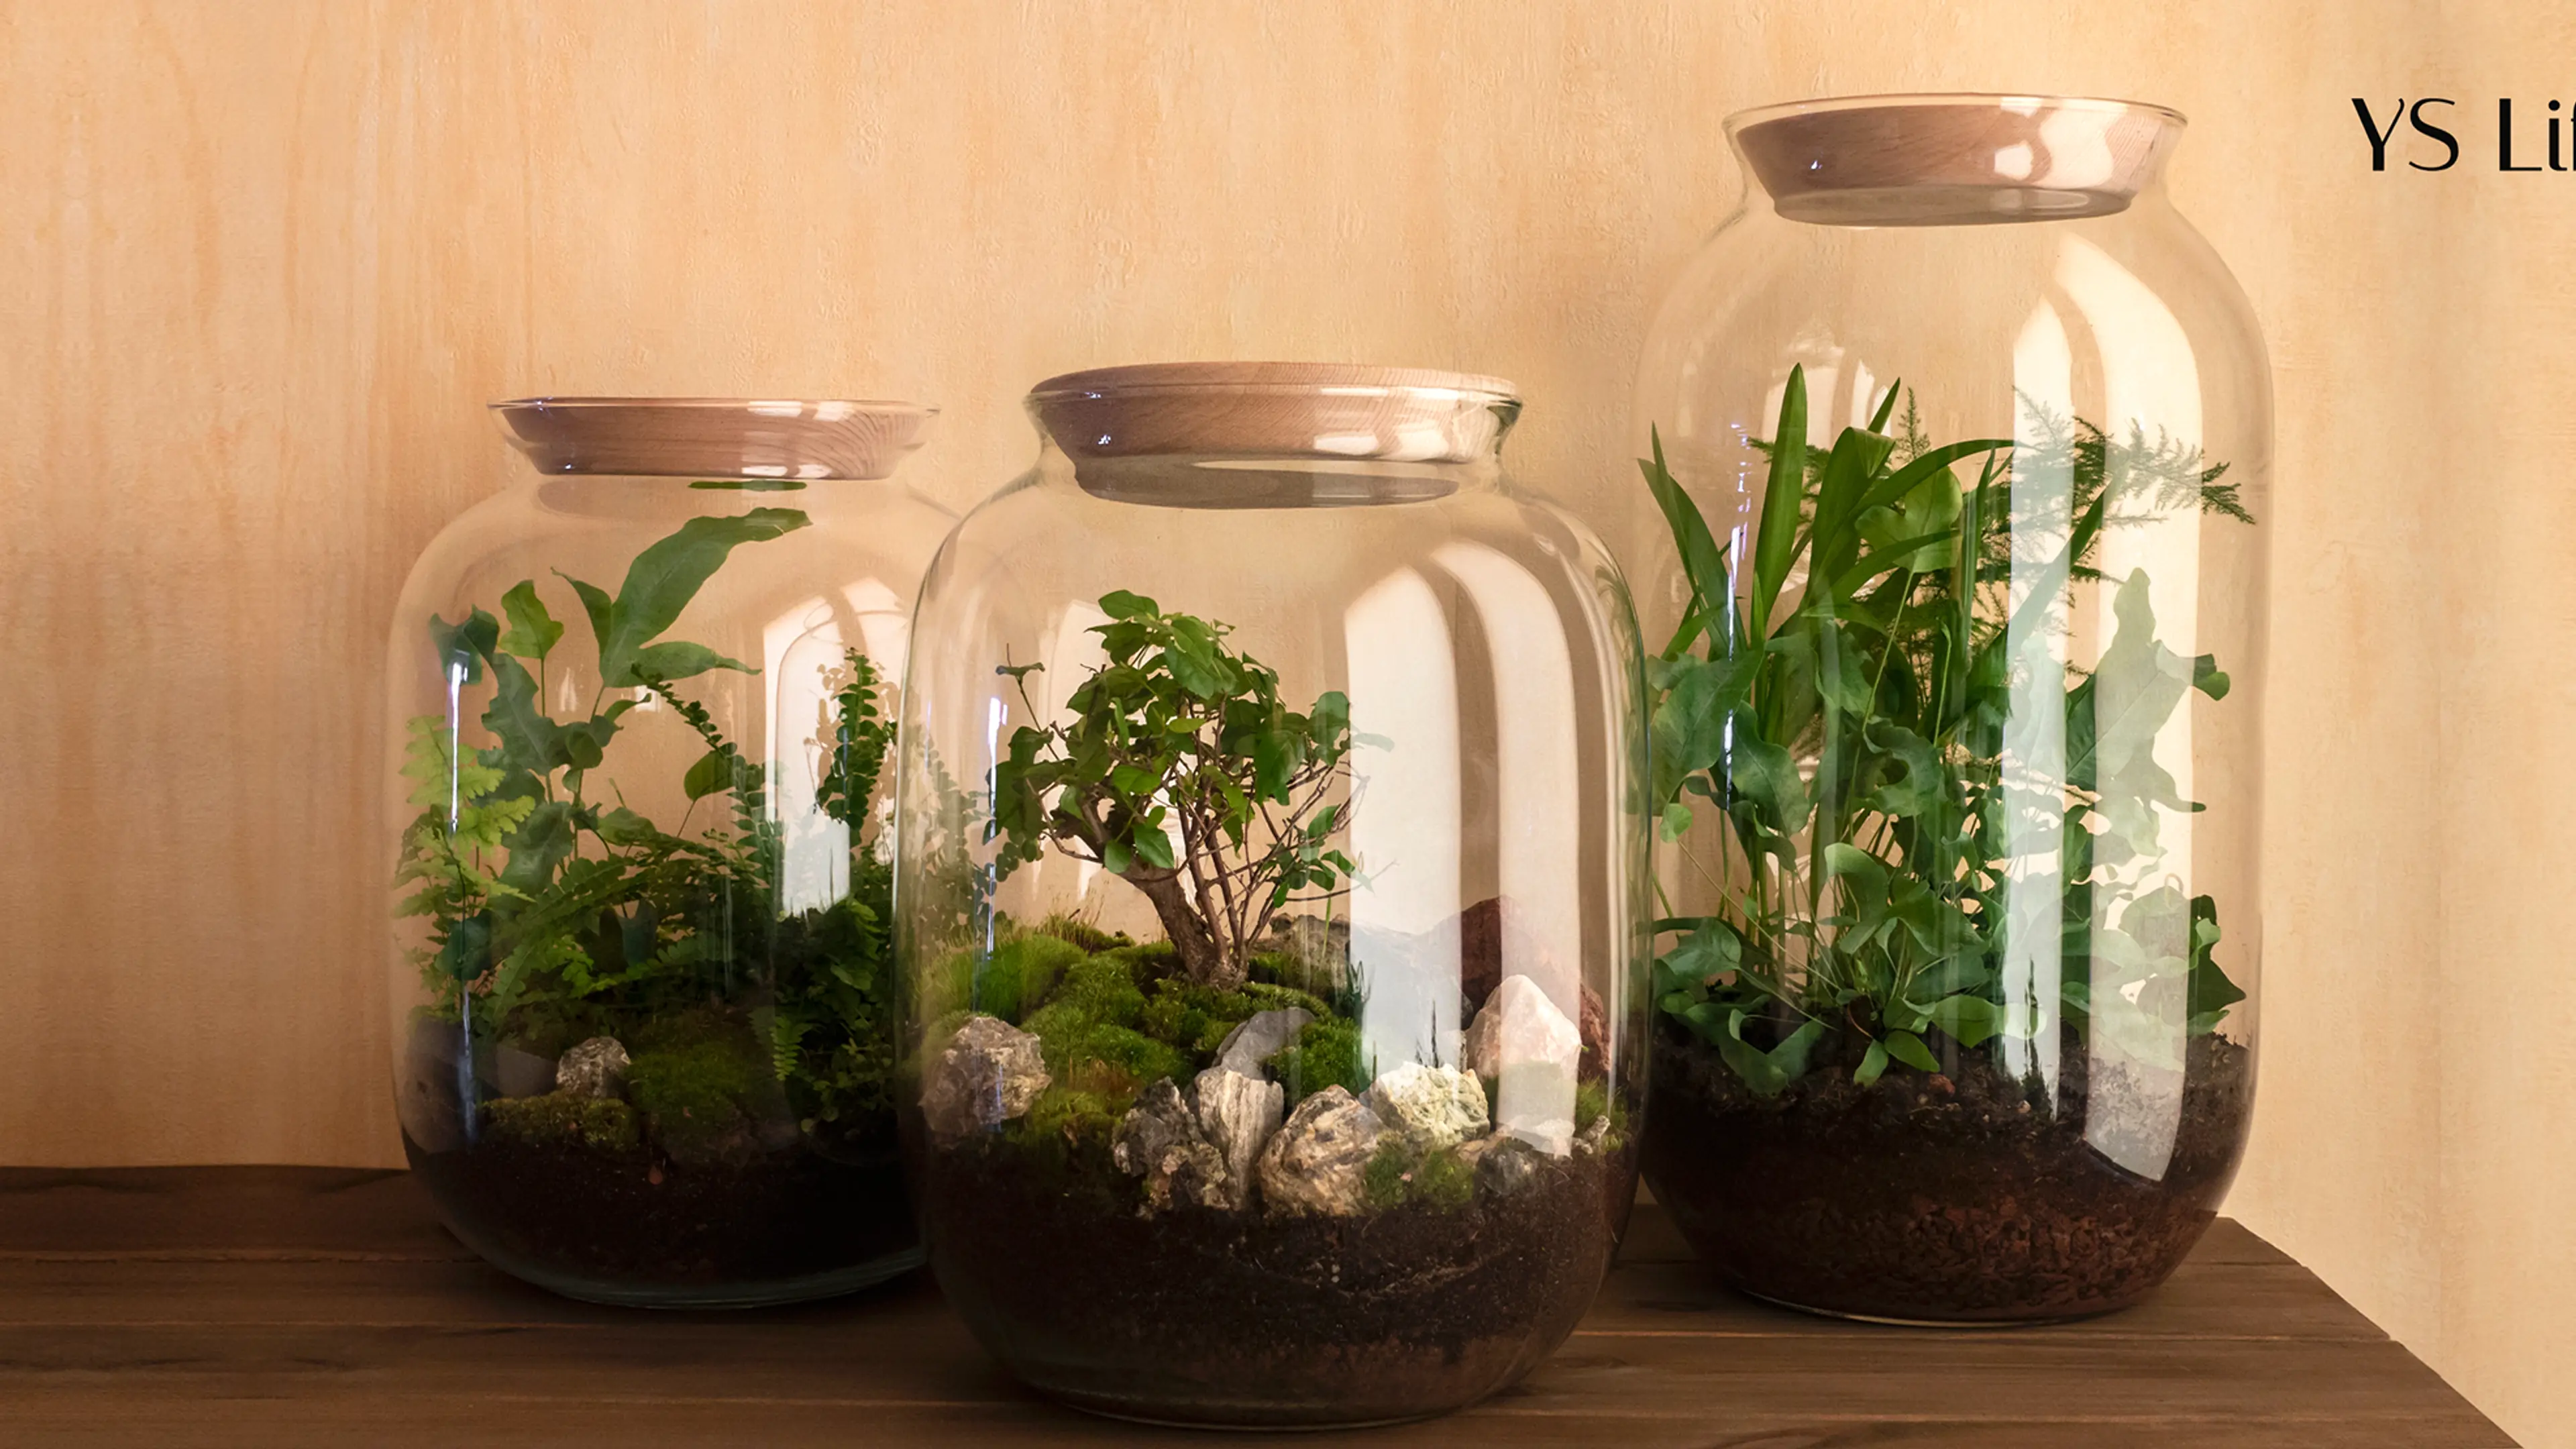 Creating your own green patch with terrariums